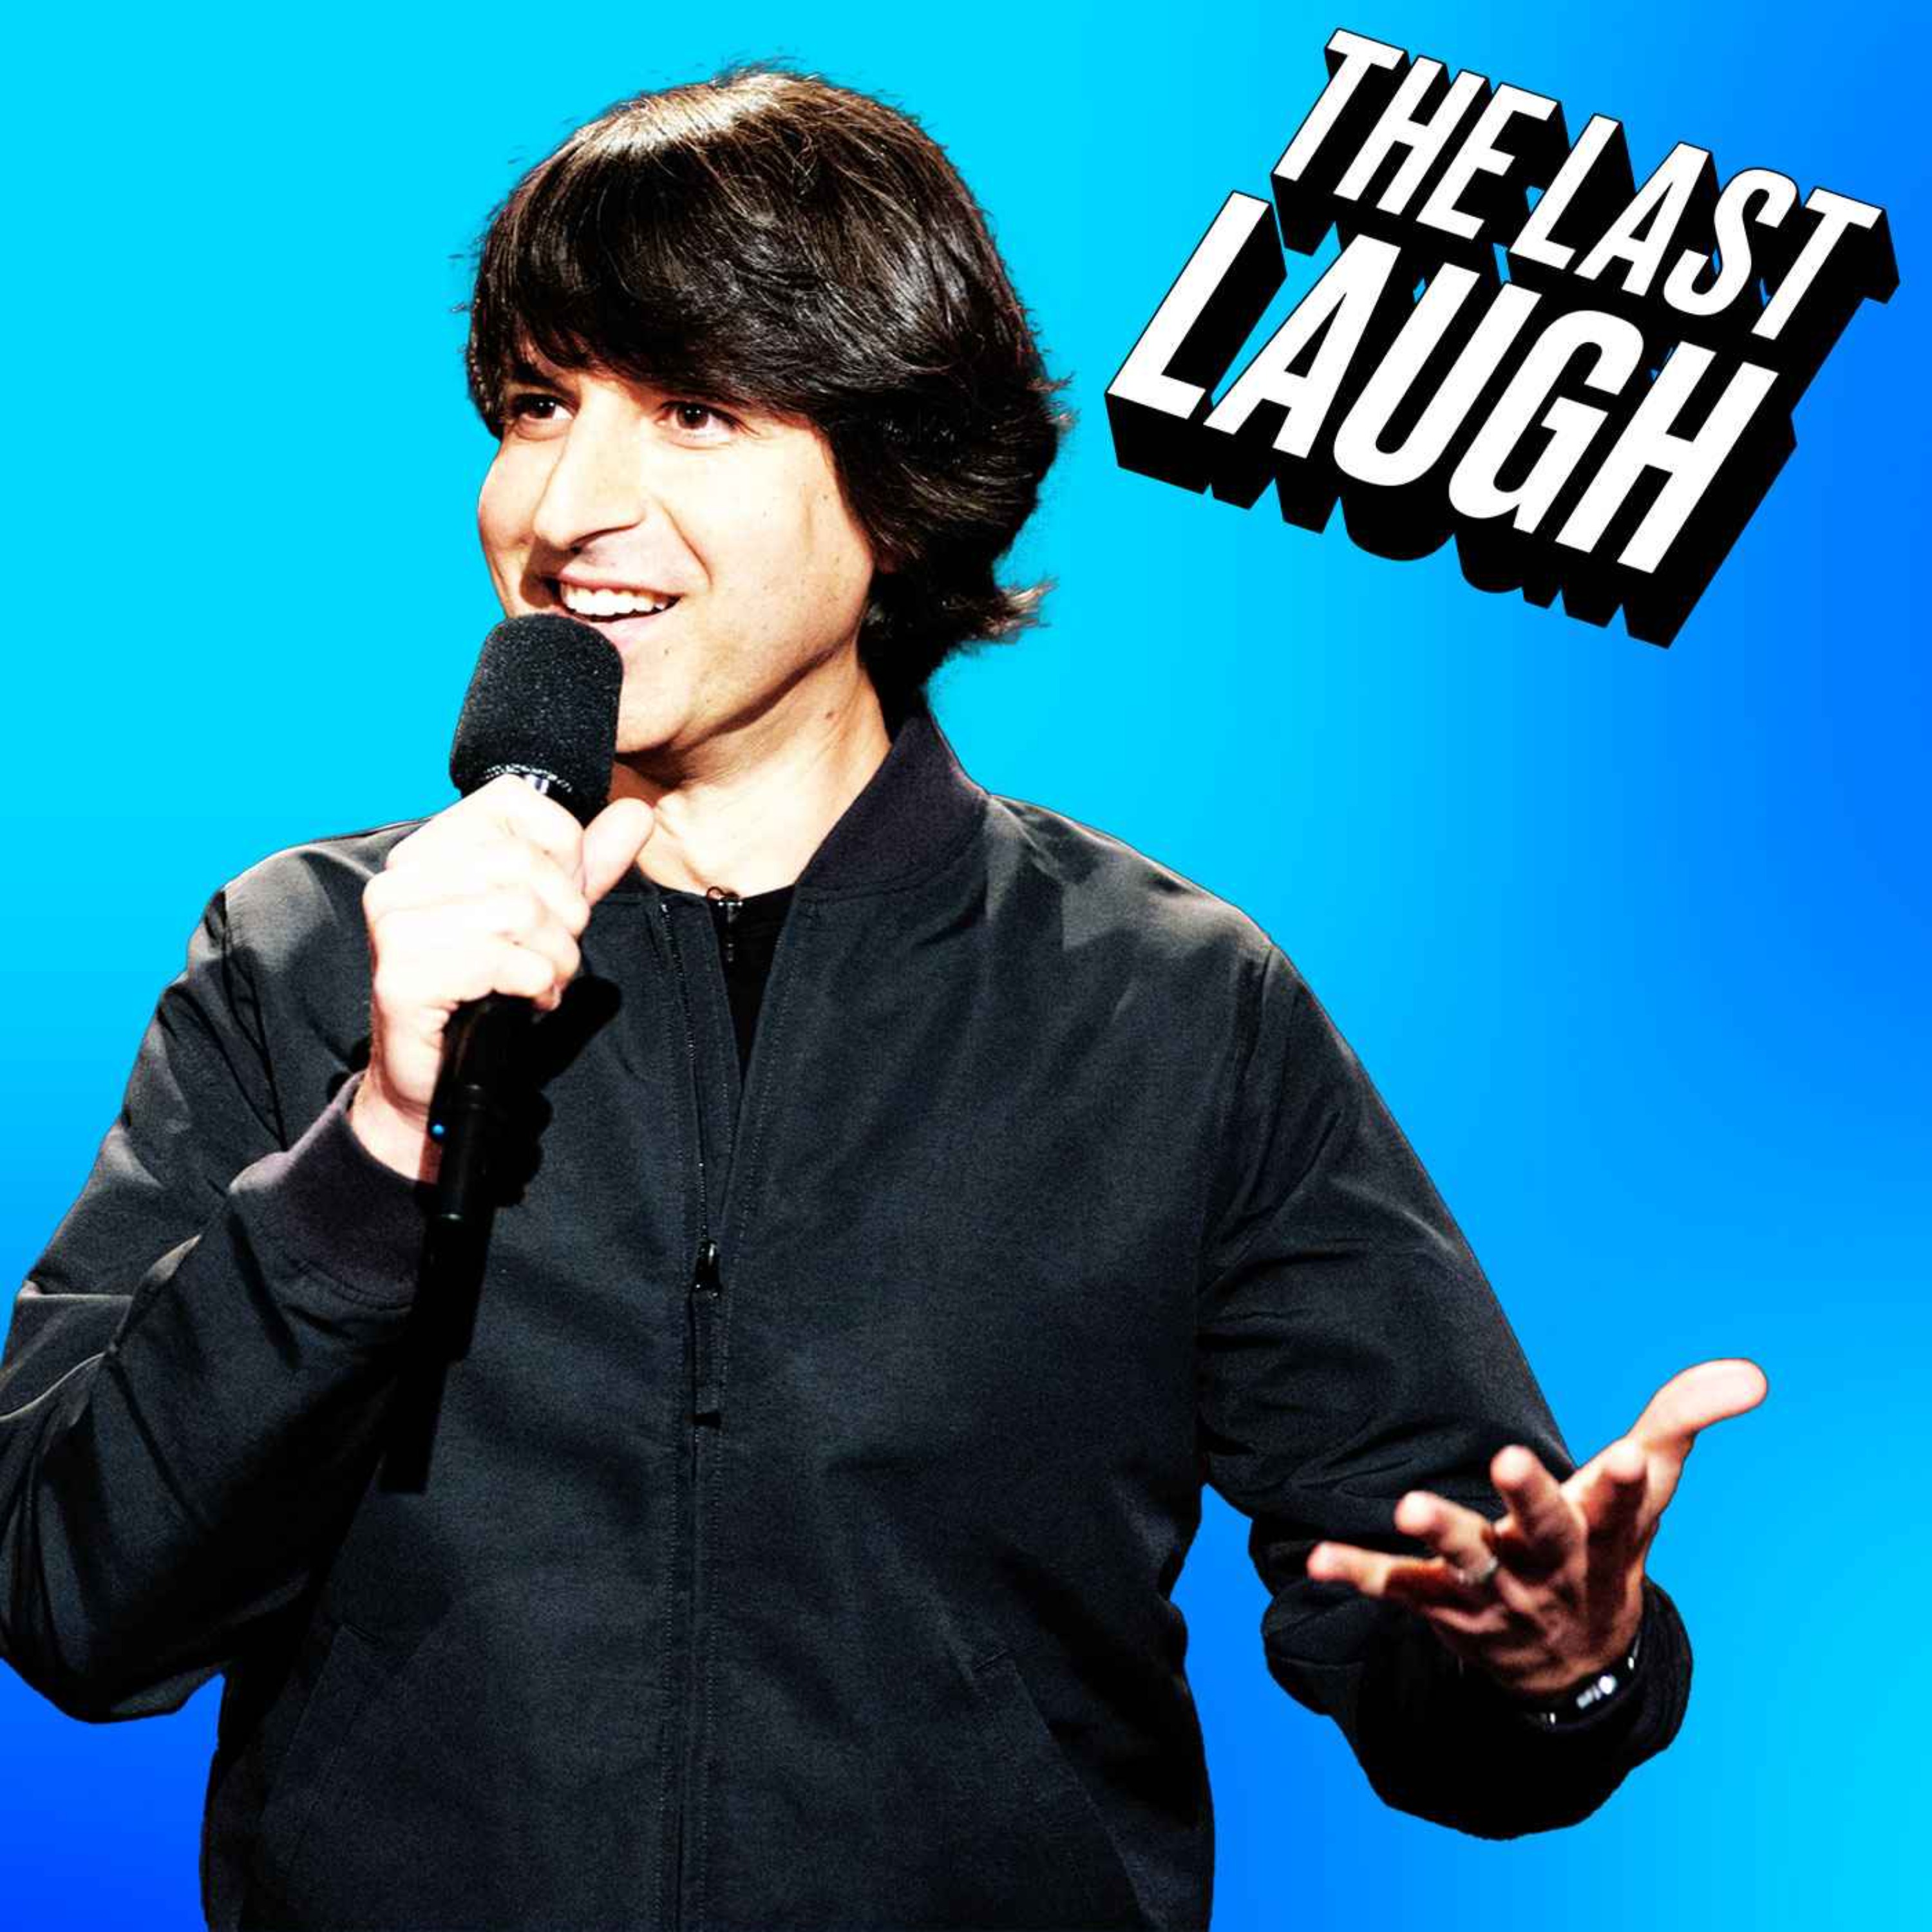 Demetri Martin ‘Deconstructed’ | Plus, What’s Up With SNL?